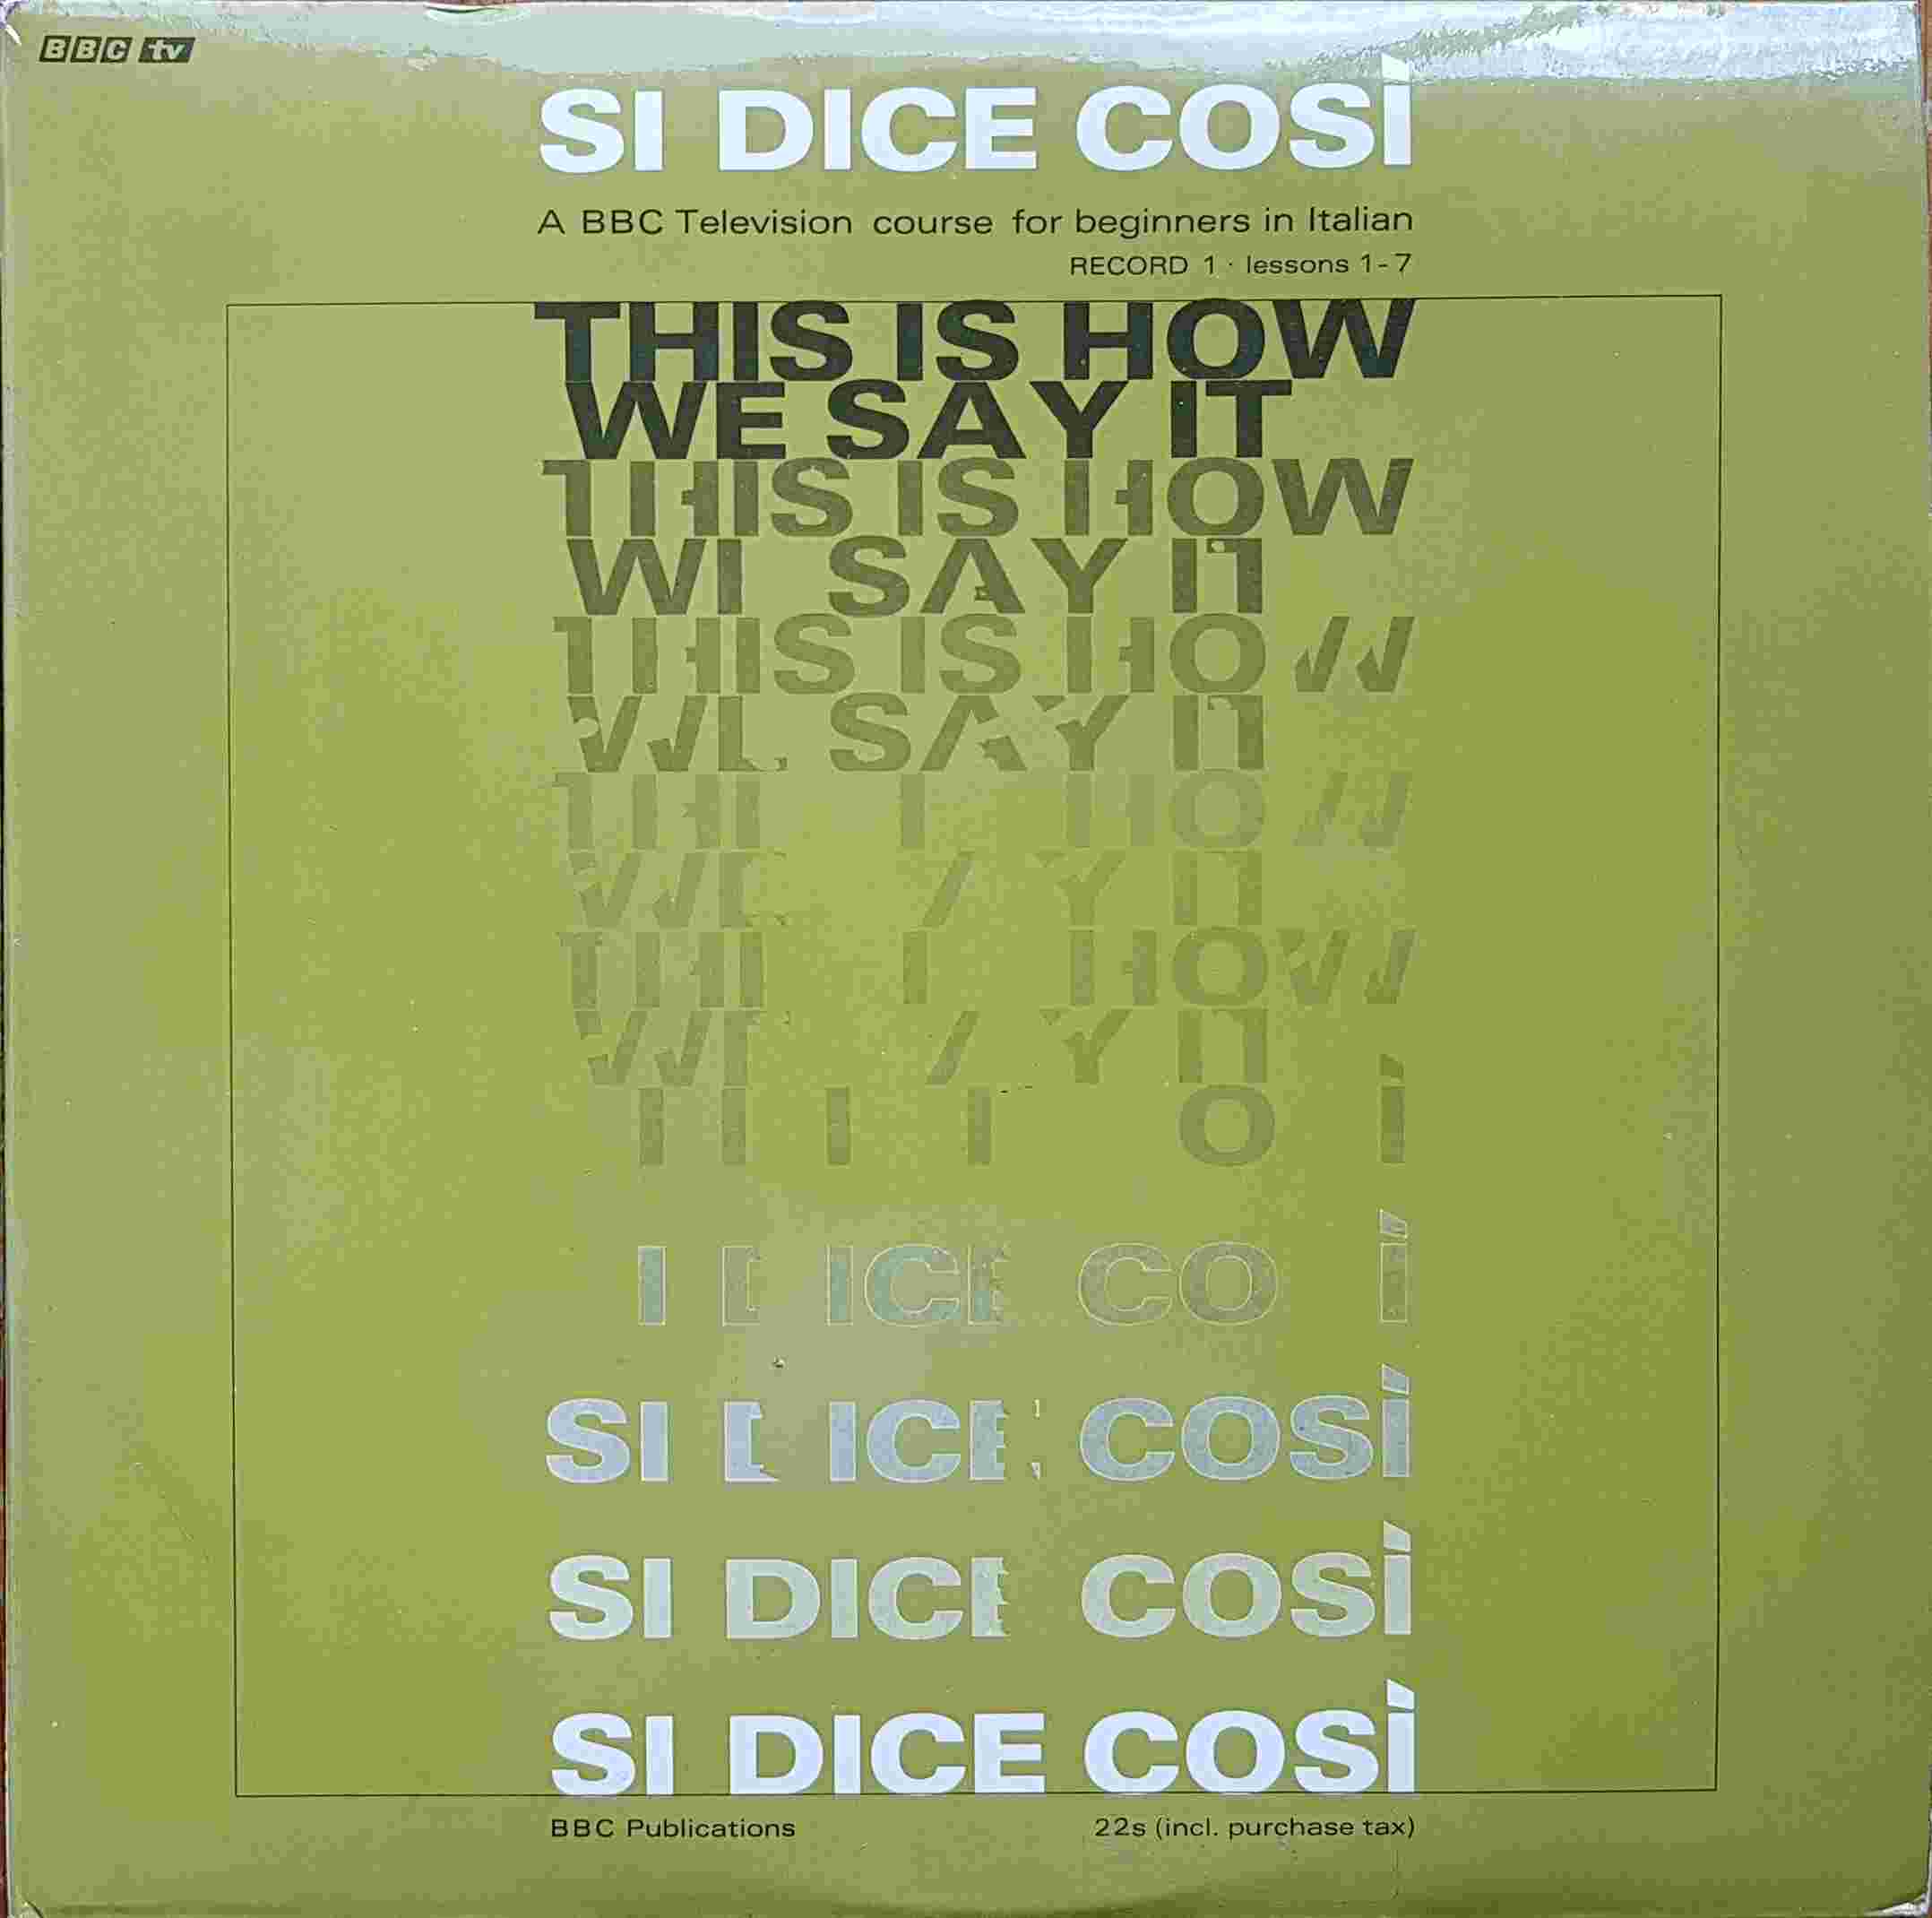 Picture of OP 127/128 Si dice cosi - A BBC Television course for beginners in Italian - Record 1 - Lessons 1 - 7 by artist Joseph Cremona from the BBC albums - Records and Tapes library